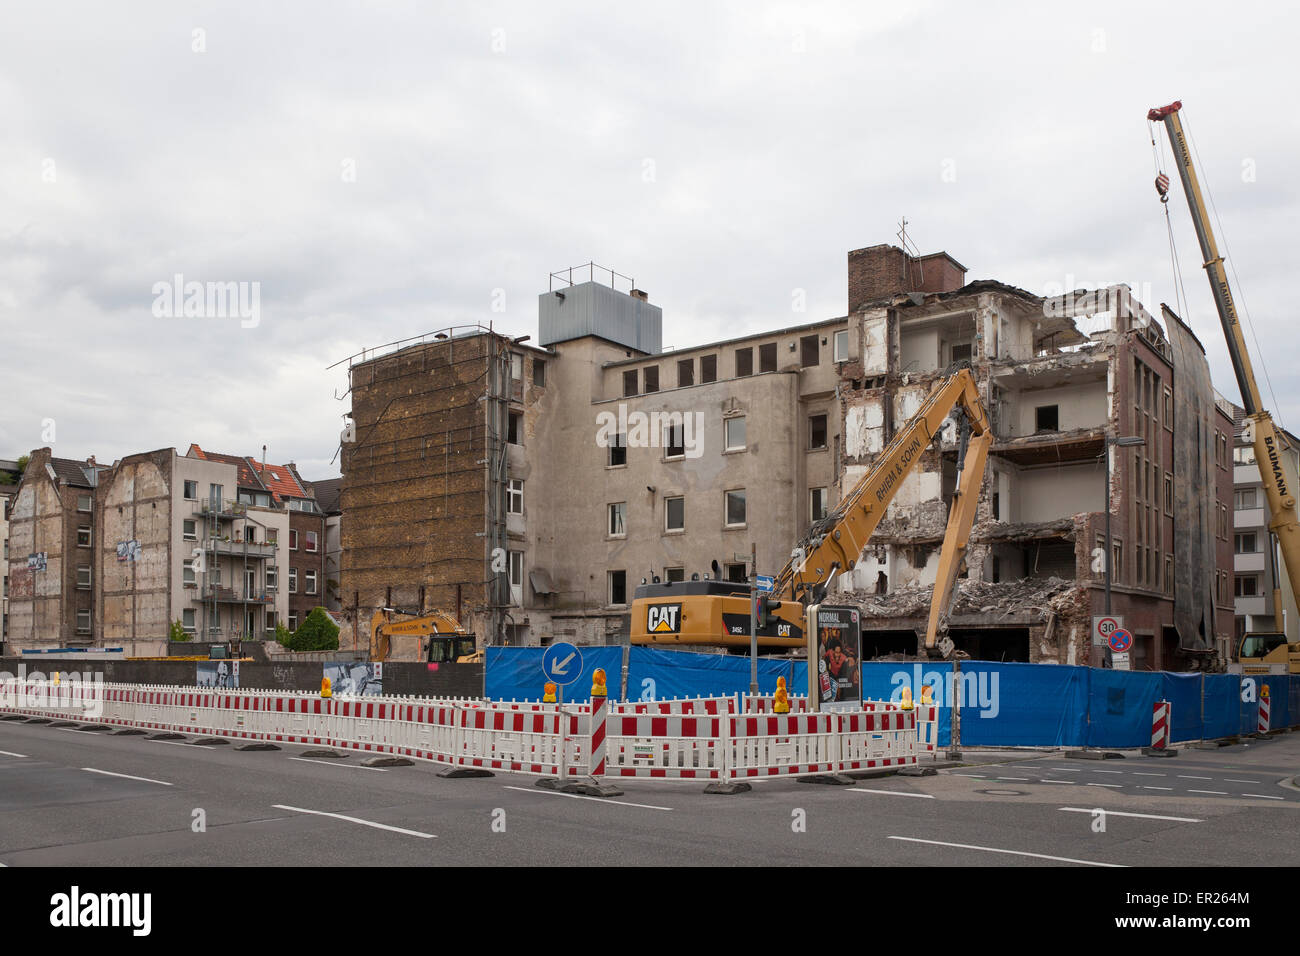 Europe, Germany, North Rhine-Westphalia, Cologne, demolition of the former haed office of the lemonade brands Afri-Cola and Blun Stock Photo